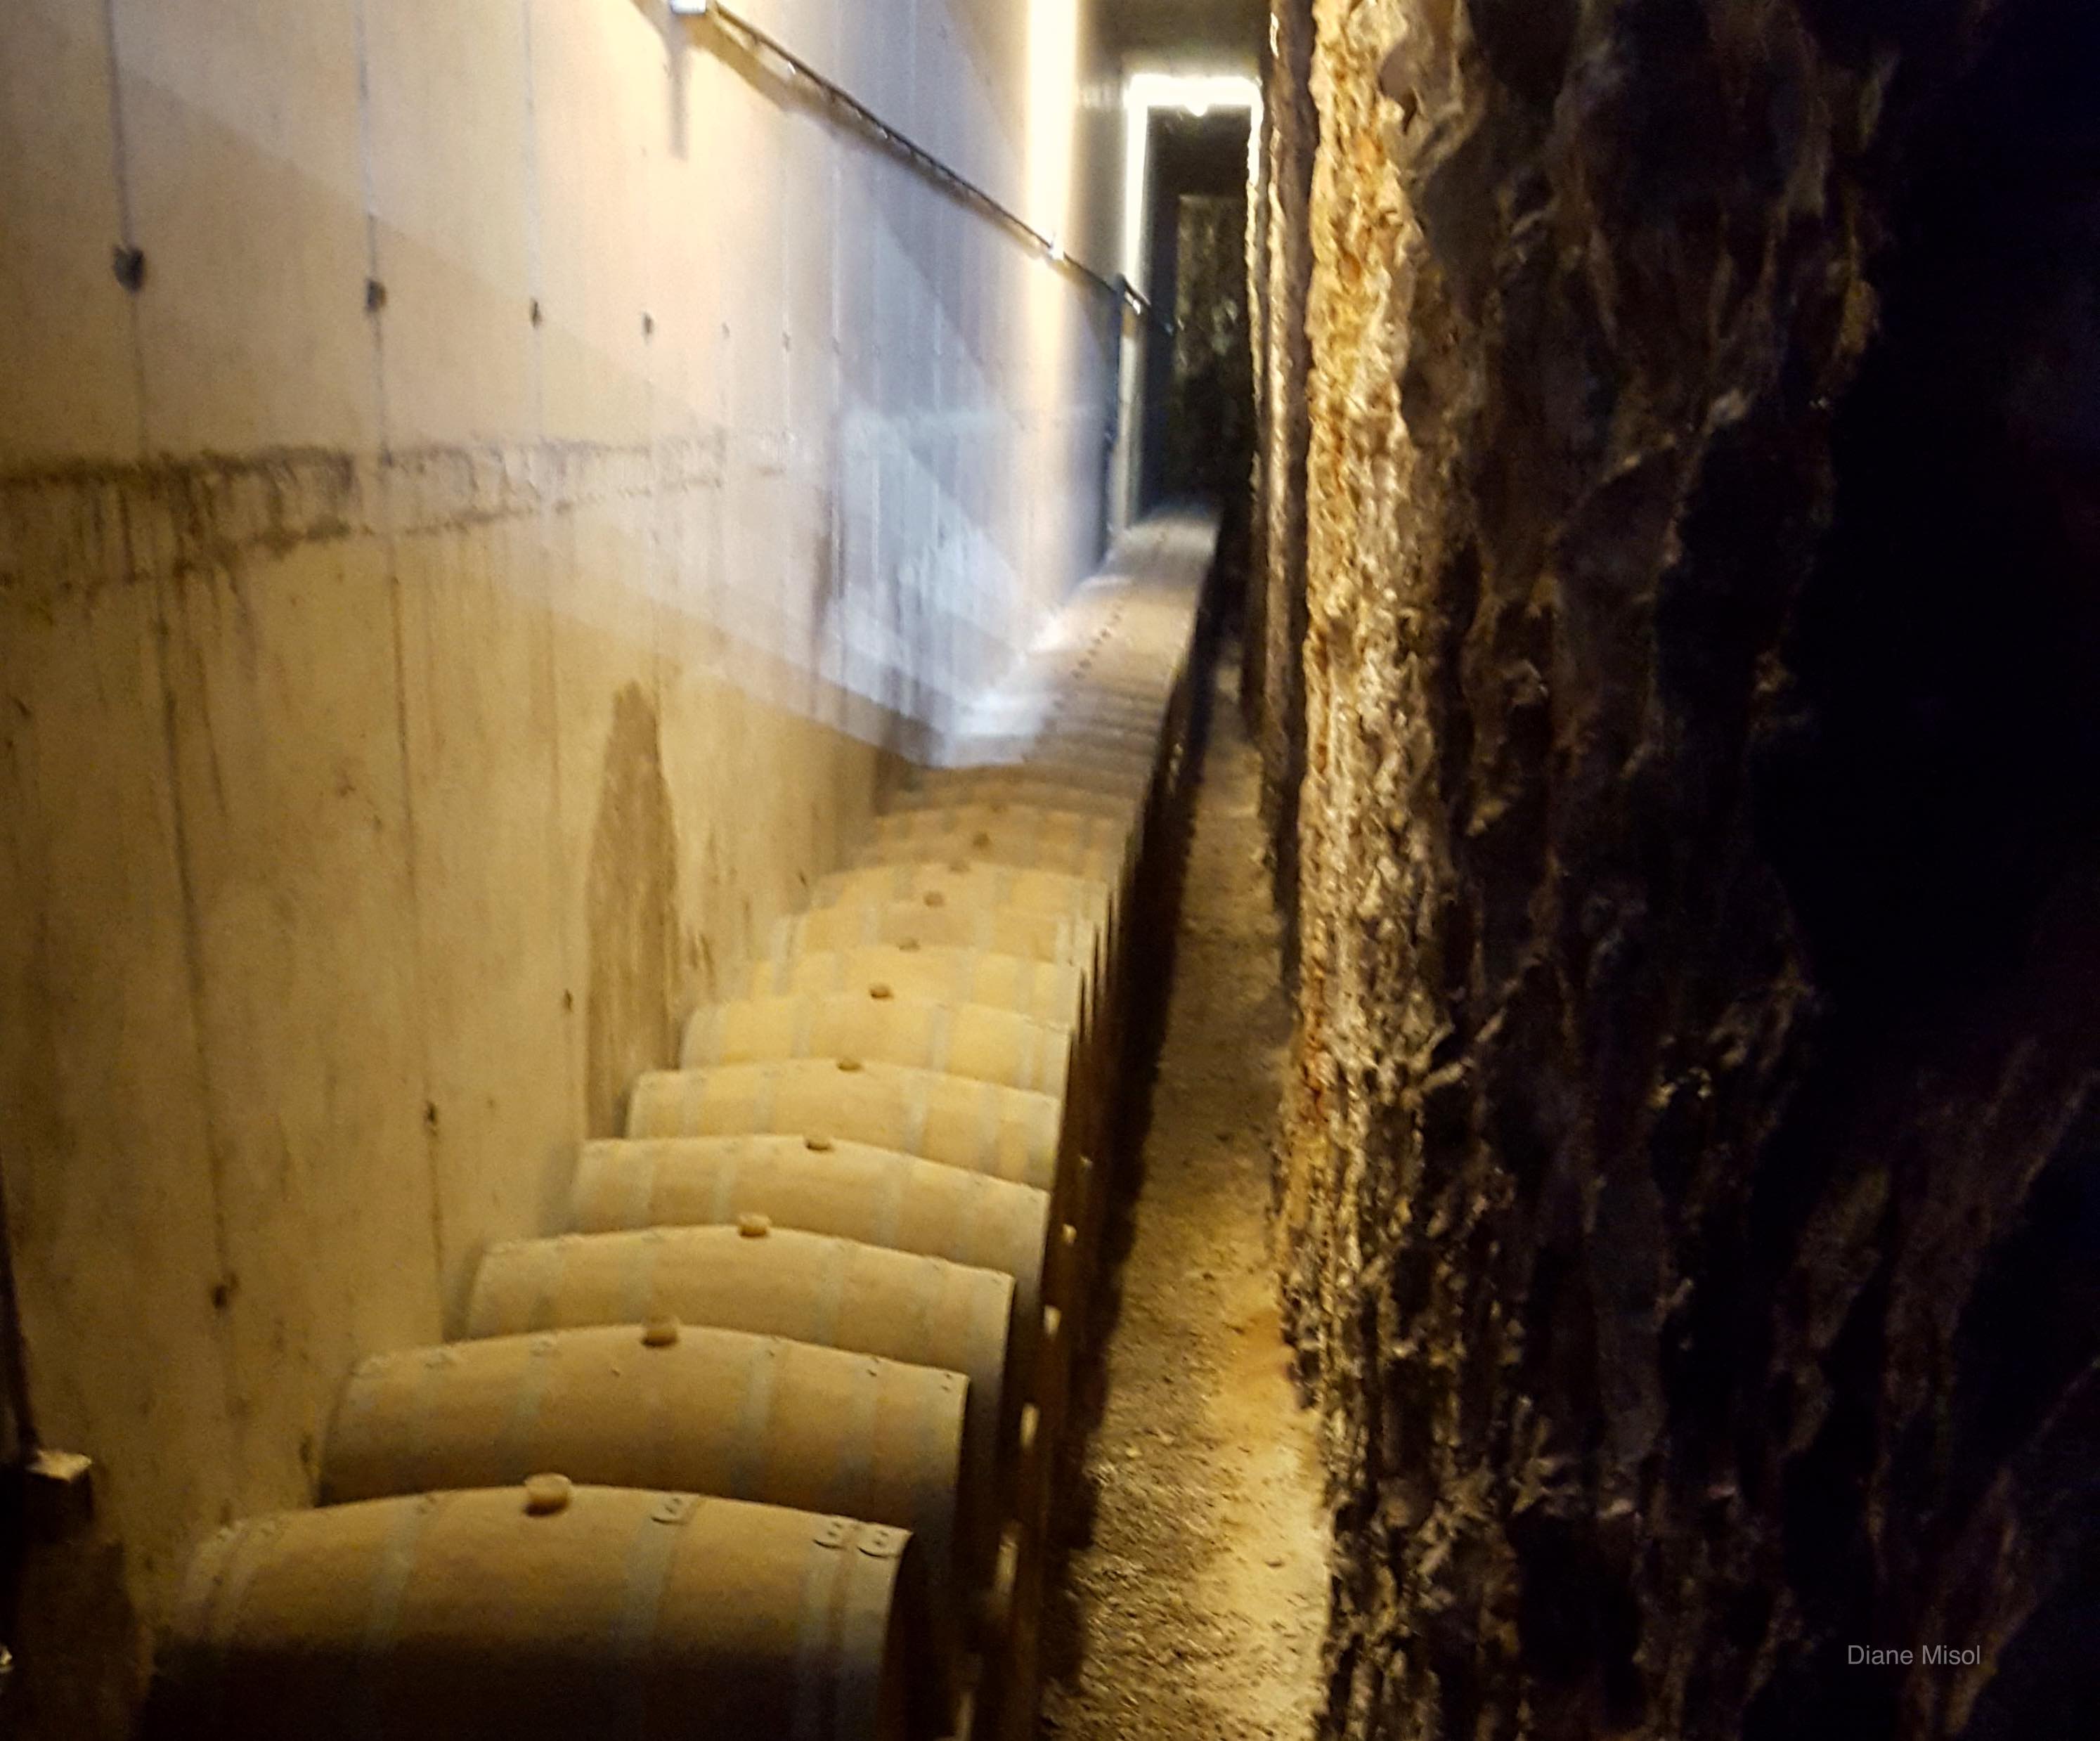 Wine Barrels staying cool in the Cellar, Puglia, Italy